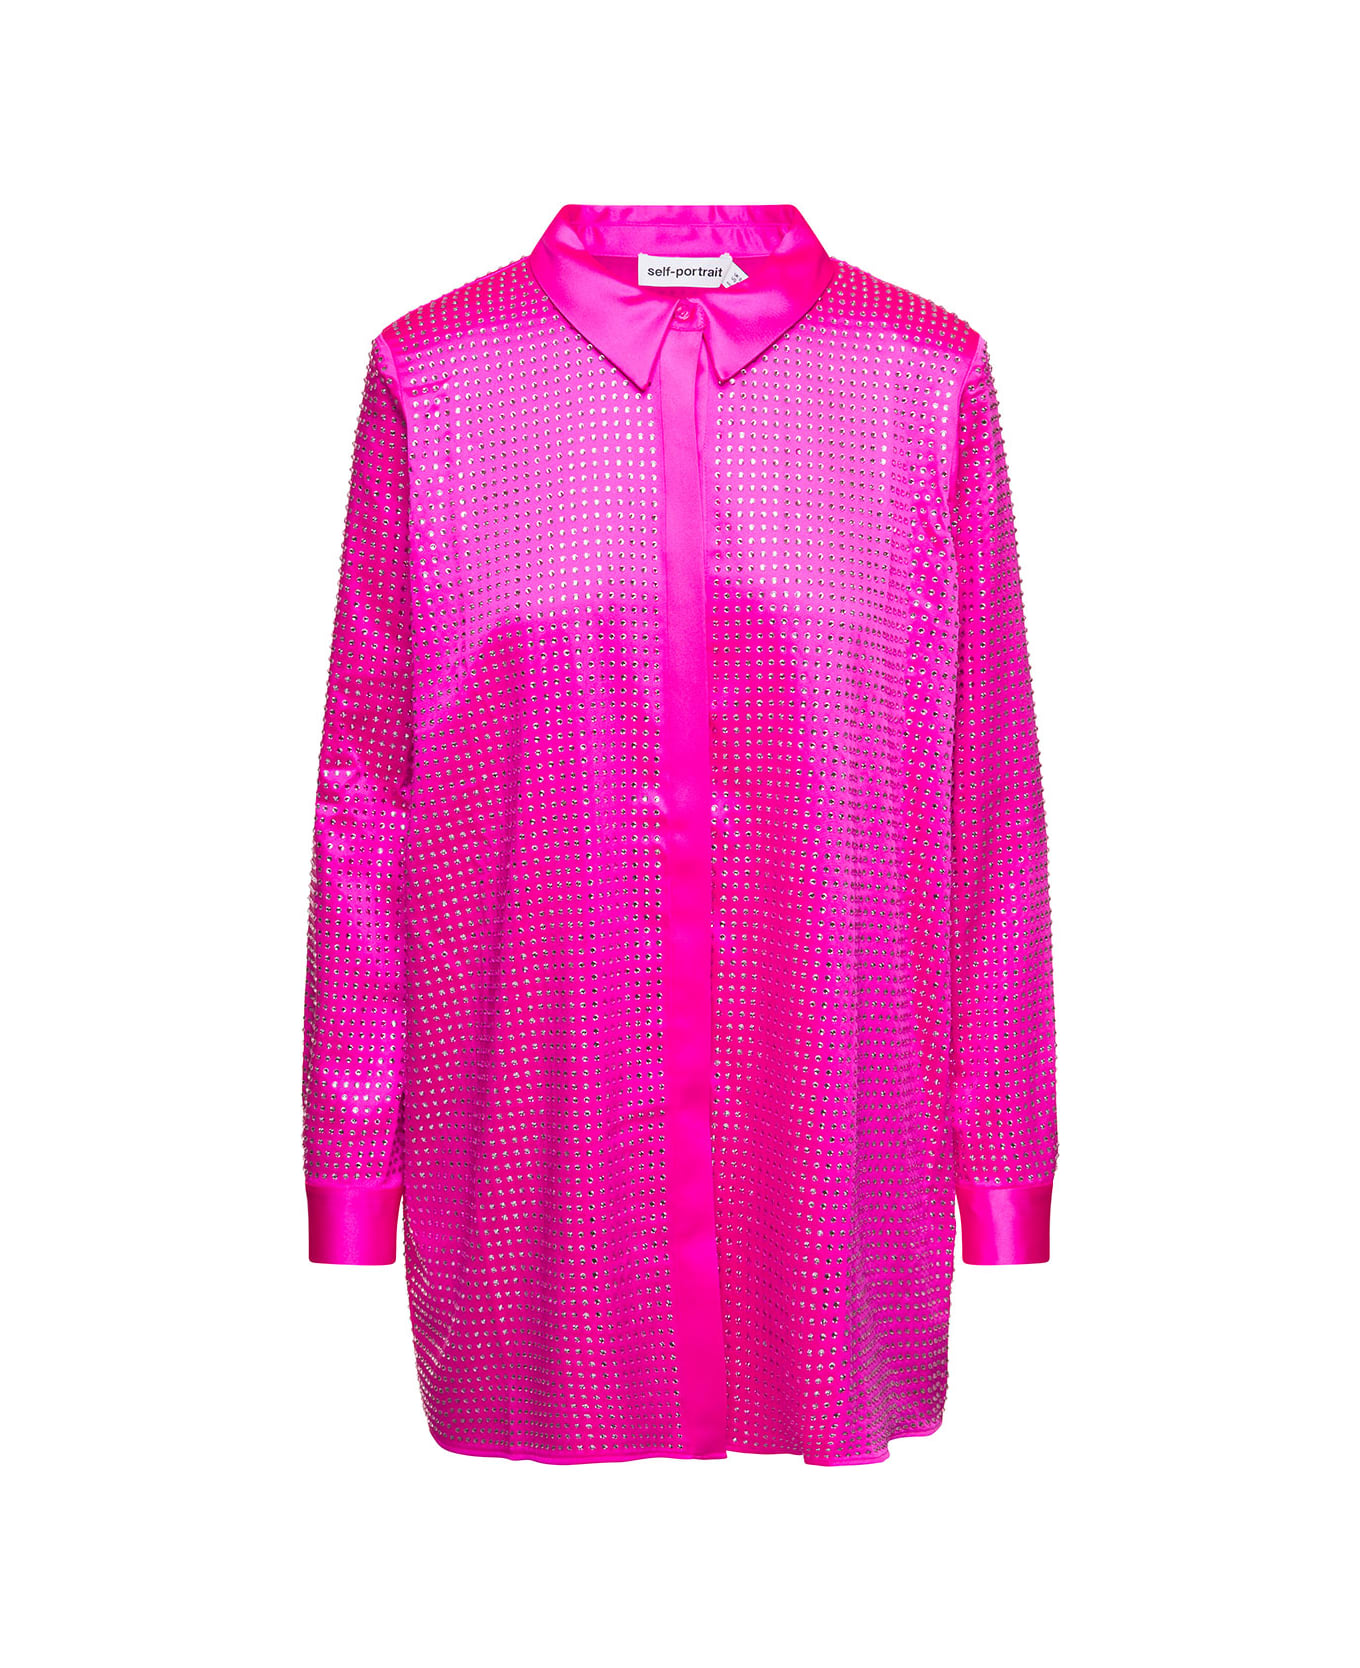 self-portrait Shirt With Crystals - Fuxia